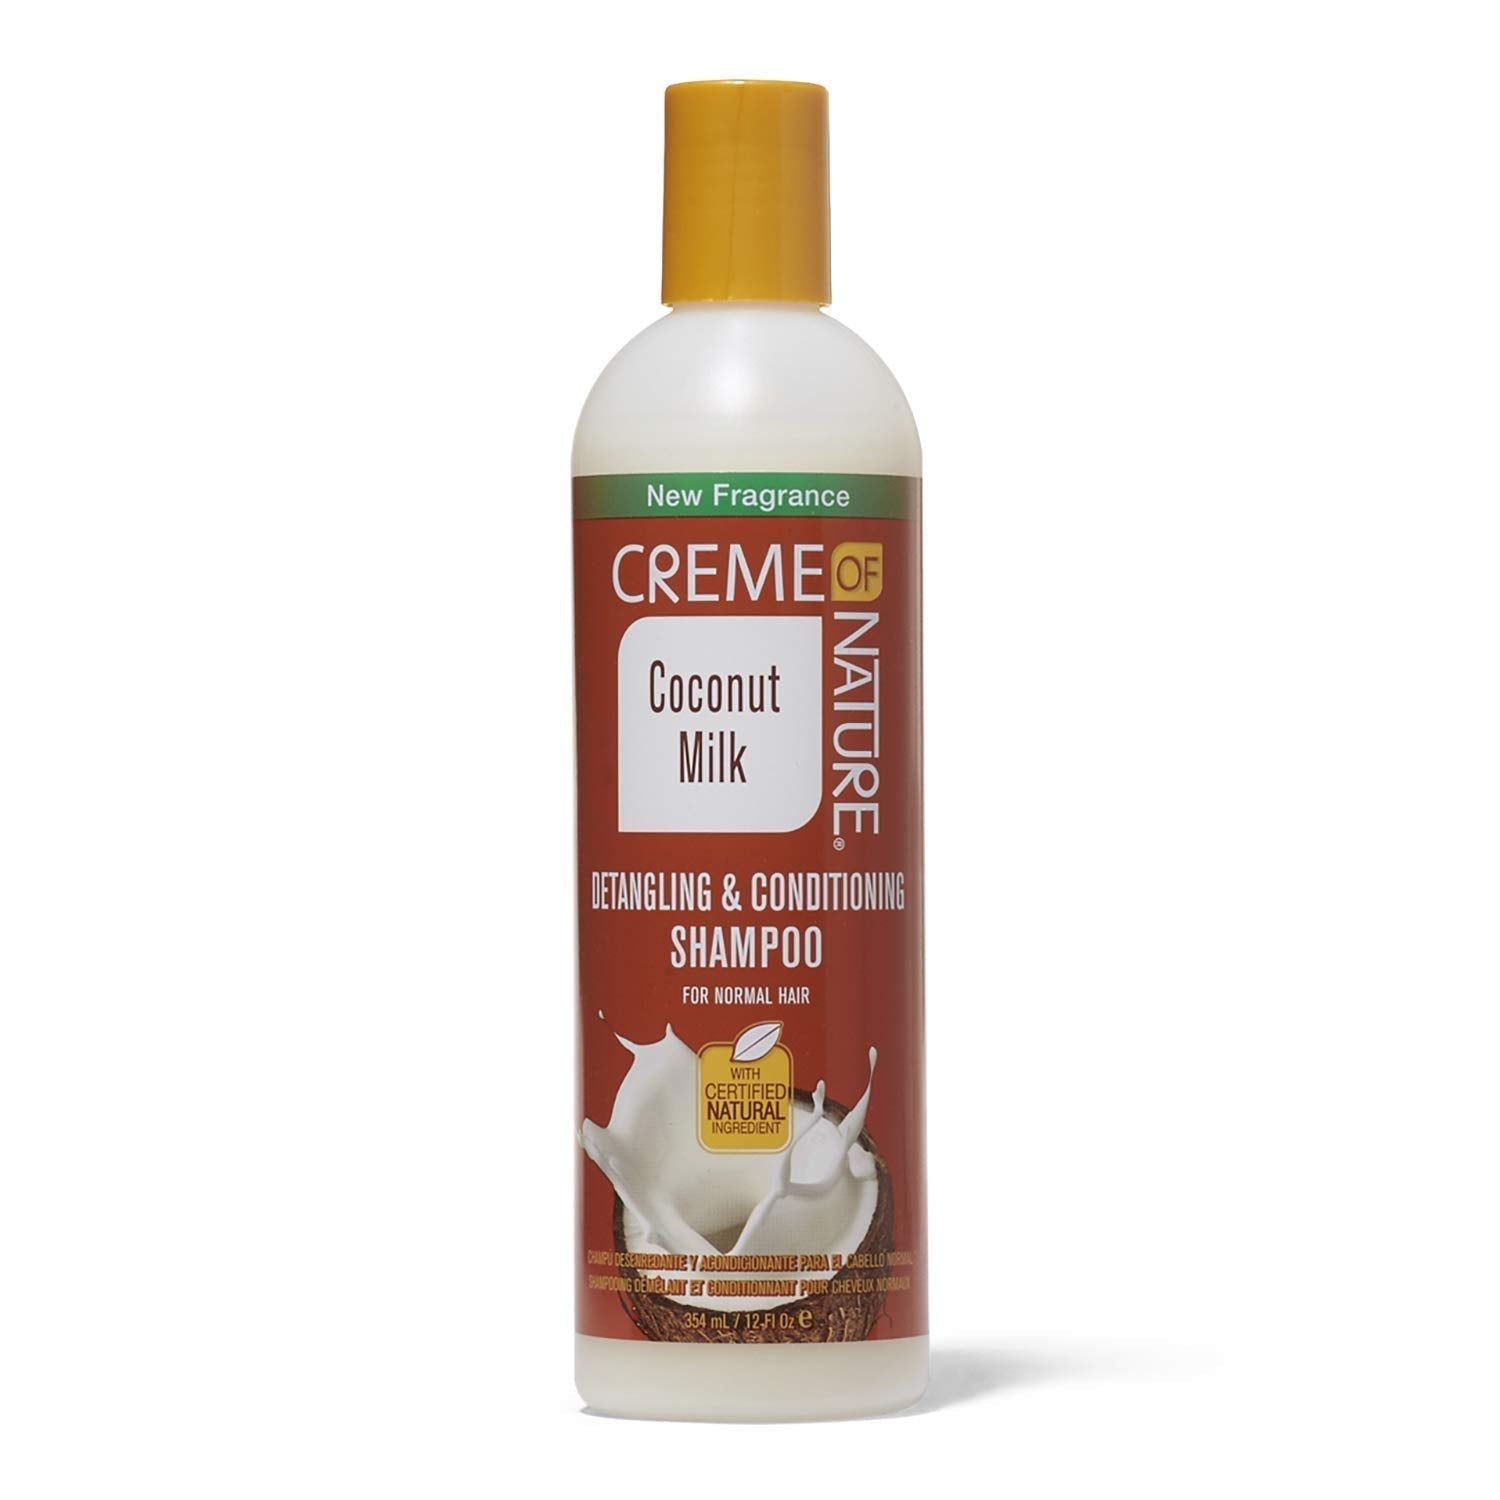 Shampoo with Coconut Milk by Creme of Nature, Detangling and Conditioning Formula for Normal Hair, 12 Fl Oz Find Your New Look Today!